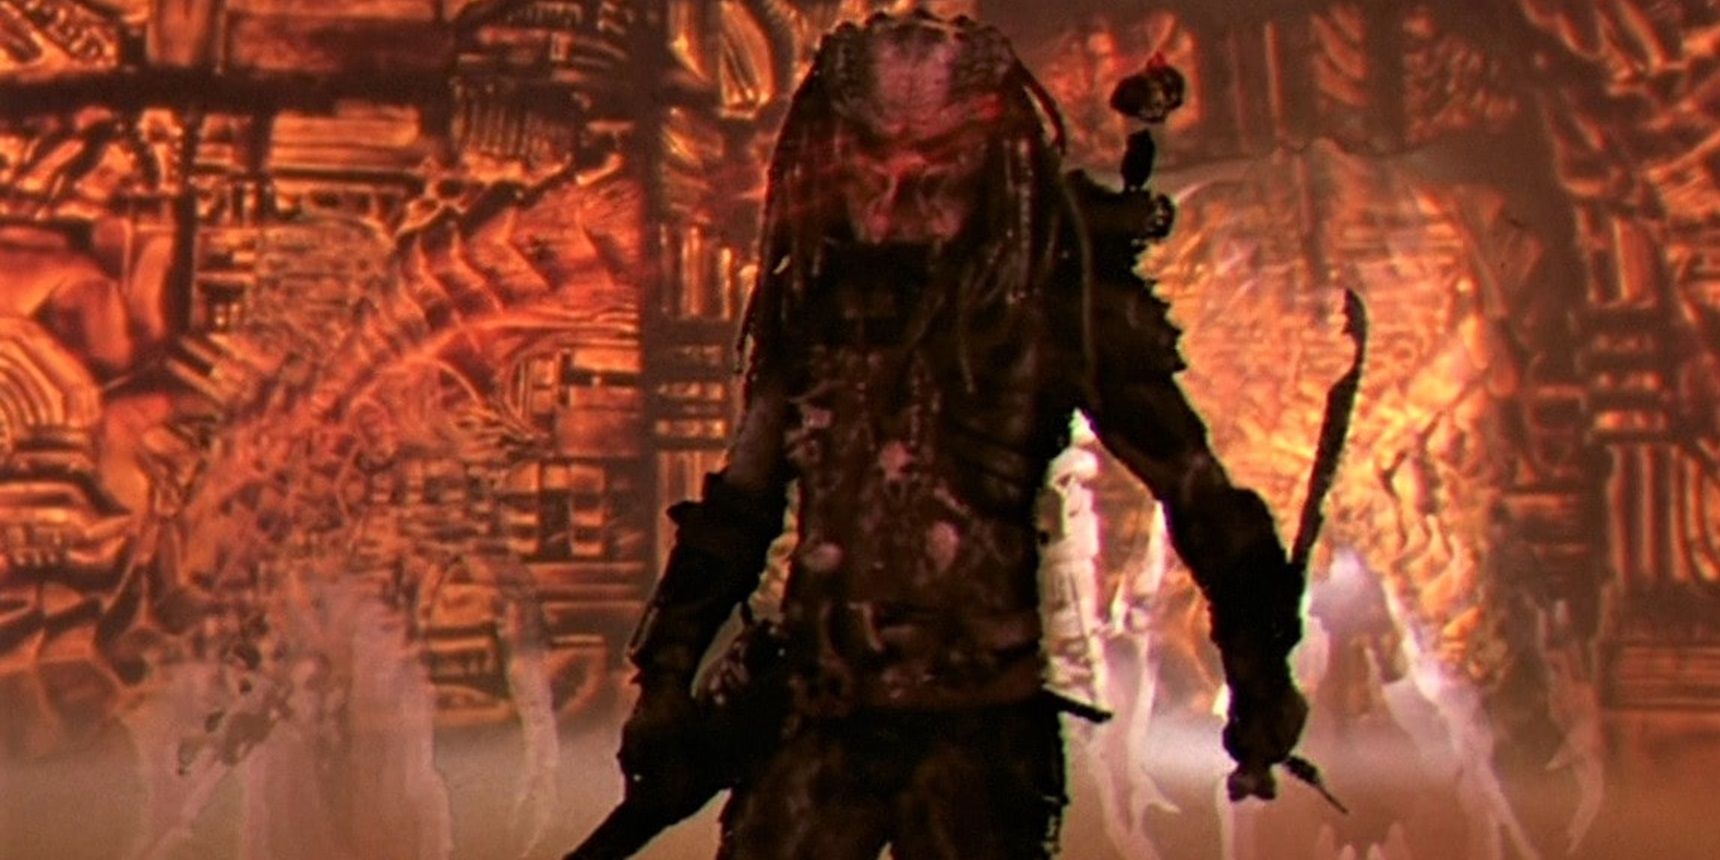 Greyback on board the mothership in Predator 2